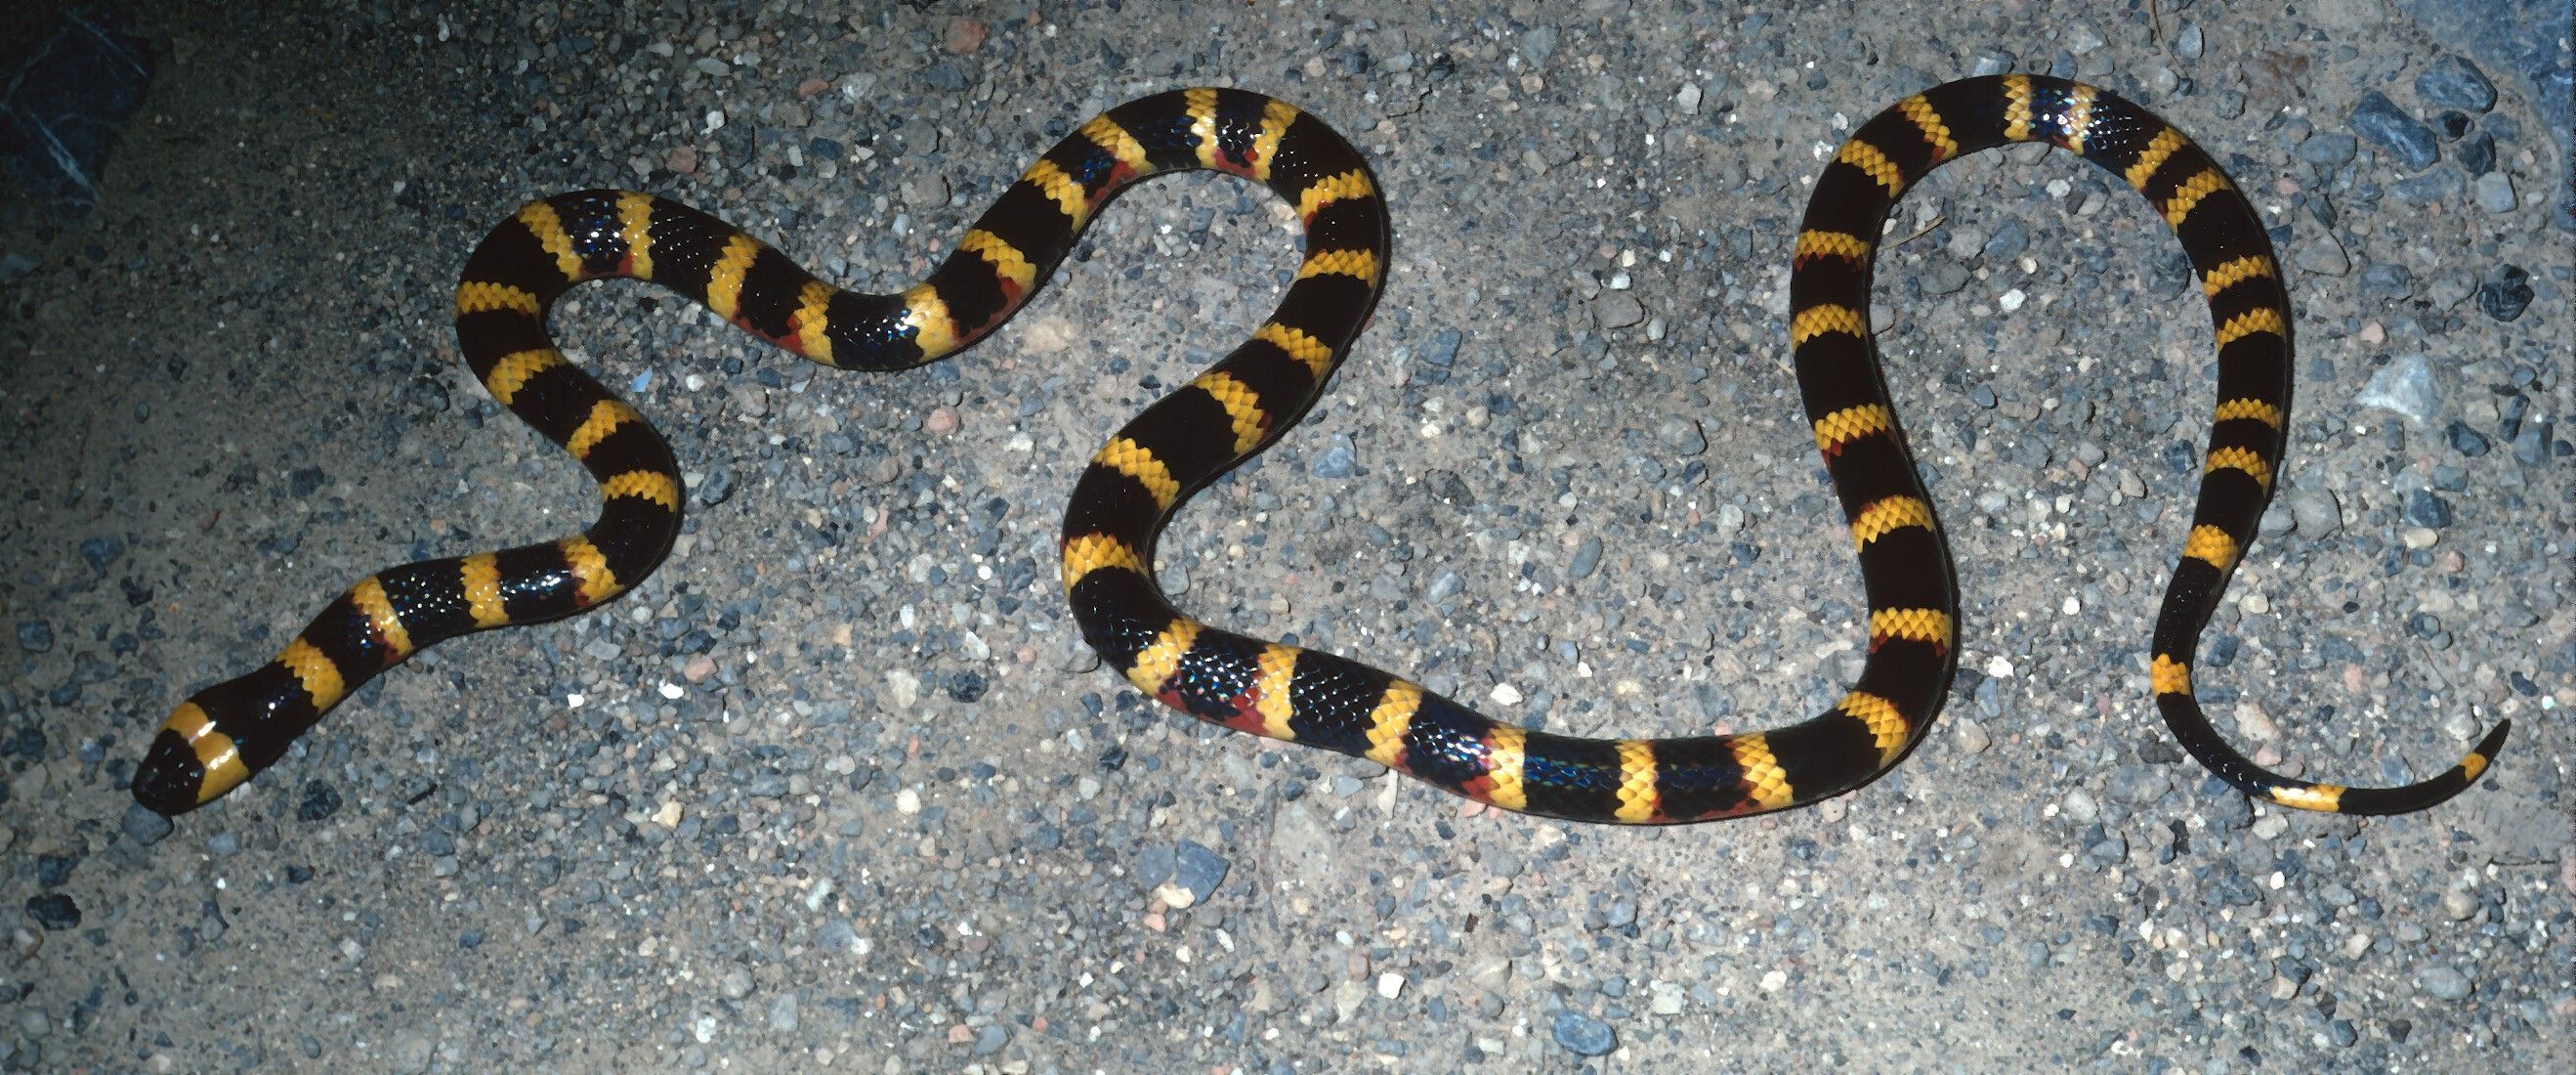 Image of Oaxacan Coral Snake